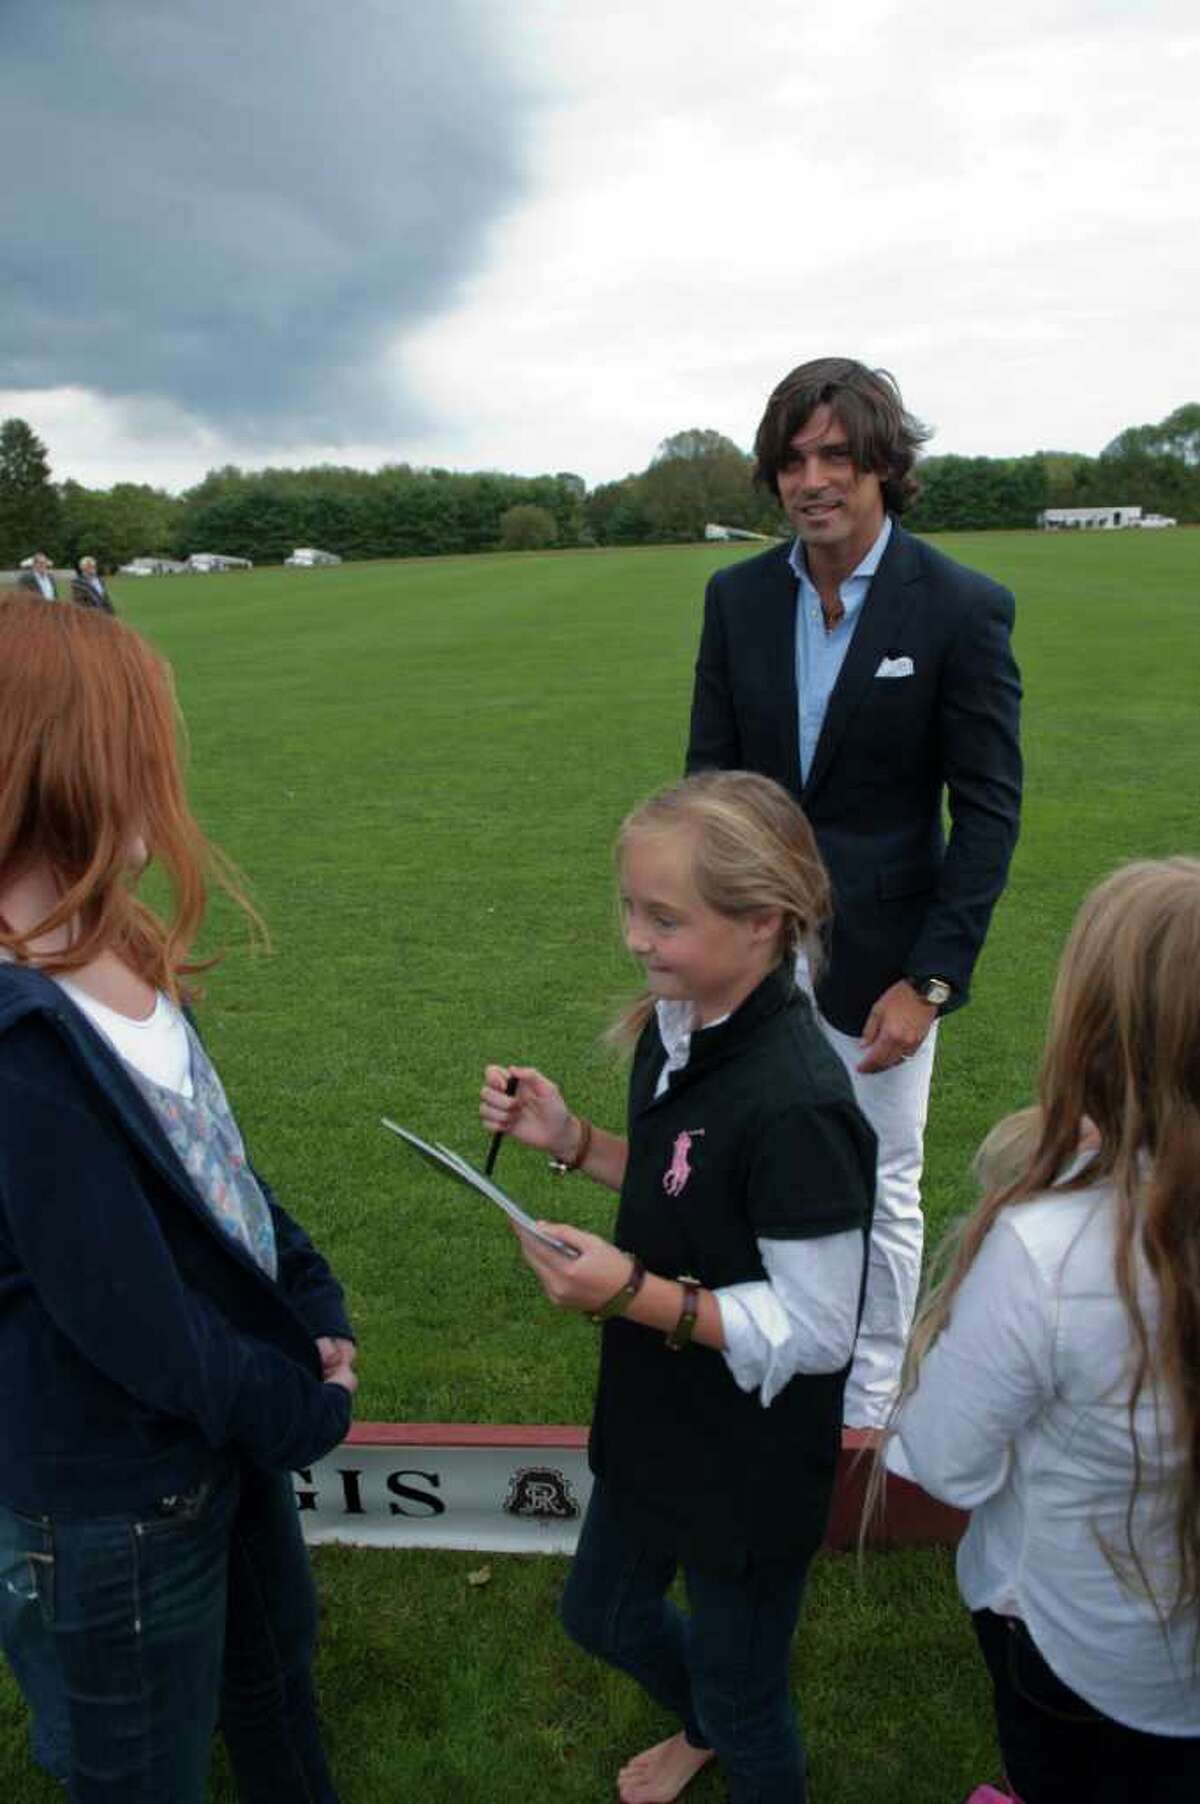 Madison Wanicka, 10, of Ridgefield, gets an autograph from Nacho Figueras, the Ralph Lauren Polo Model, on Saturday at the Greenwich Polo Club at Conyers Farm.